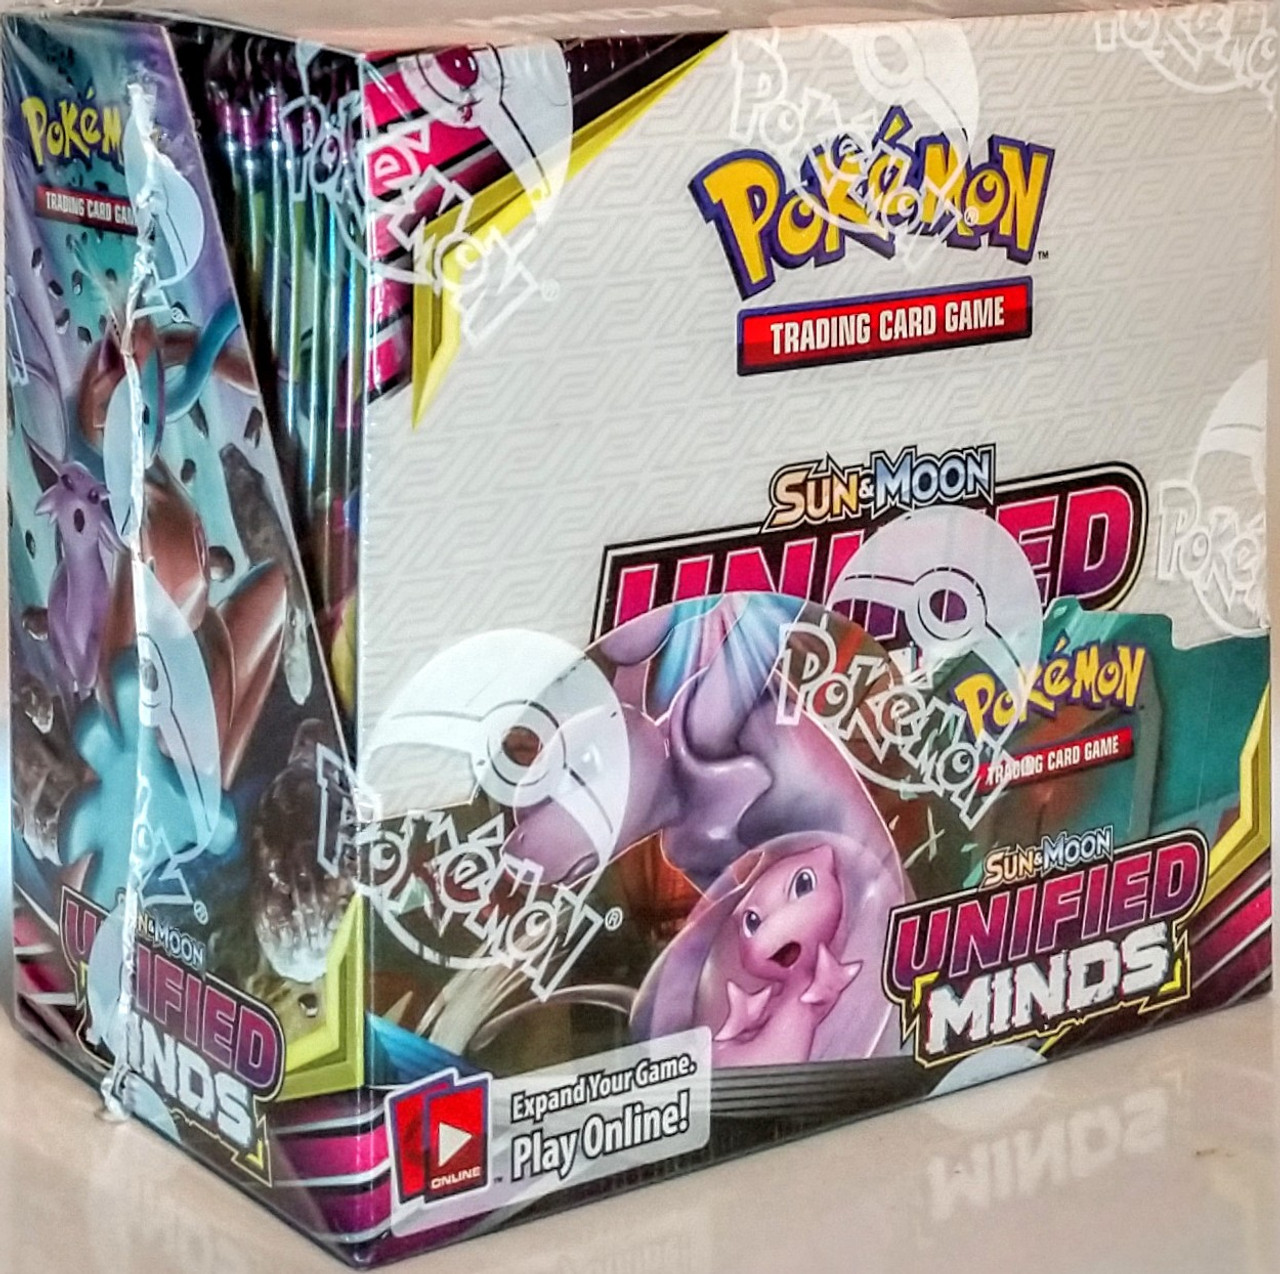 Factory Sealed New Pokemon TCG Sun&Moon Unified Minds Booster Box 36 Packs 